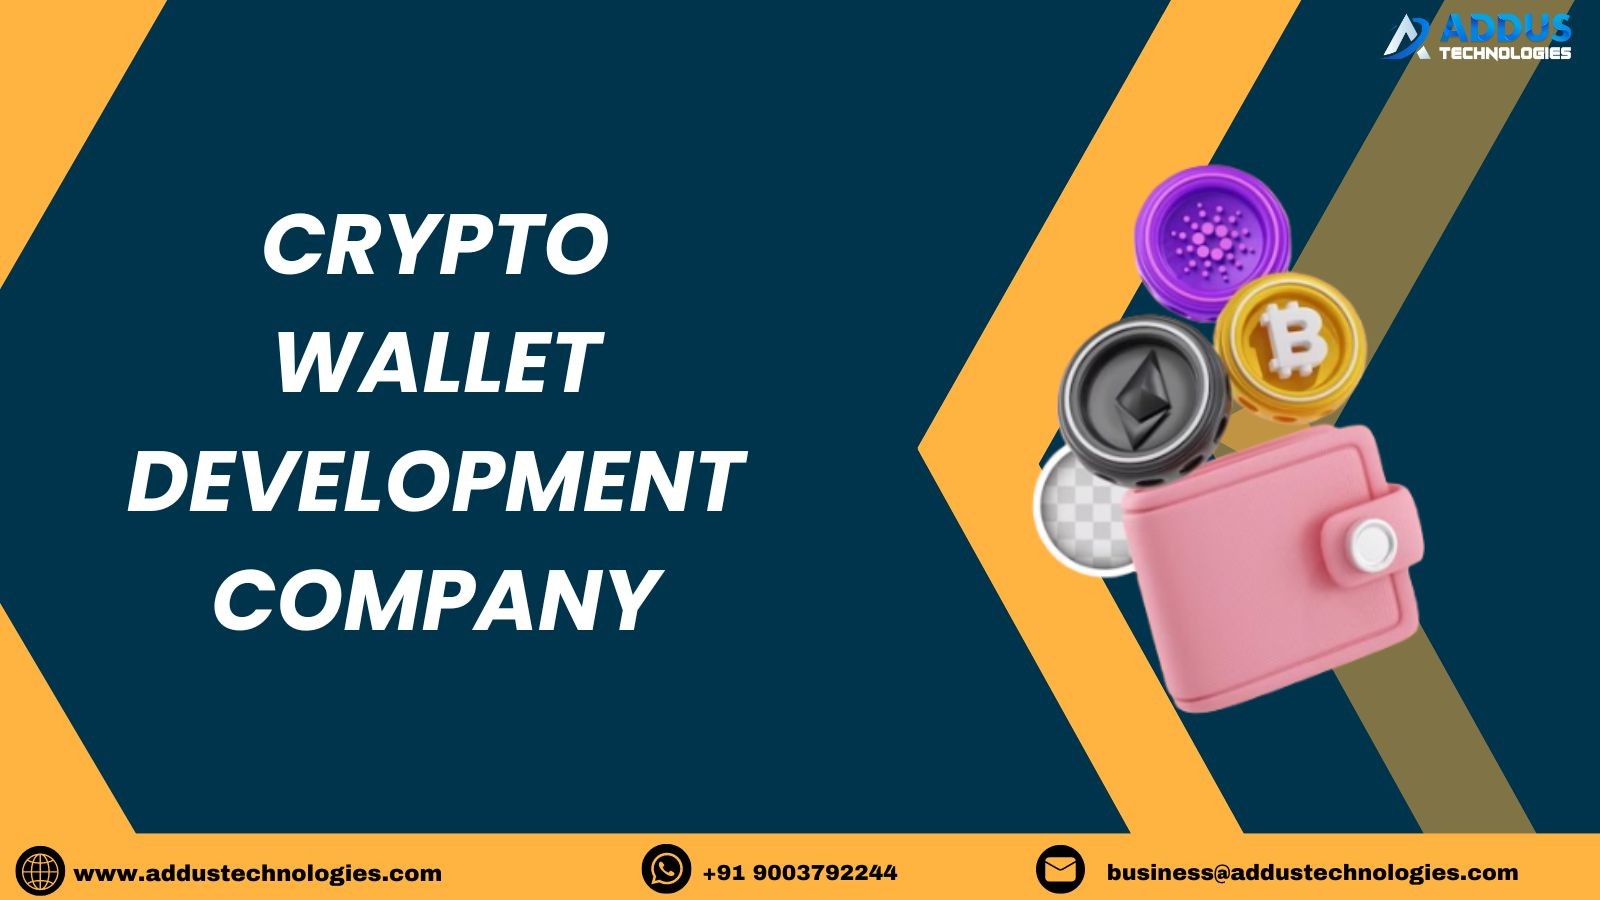 Cryptocurrency wallet development company - Addus Technologies-image